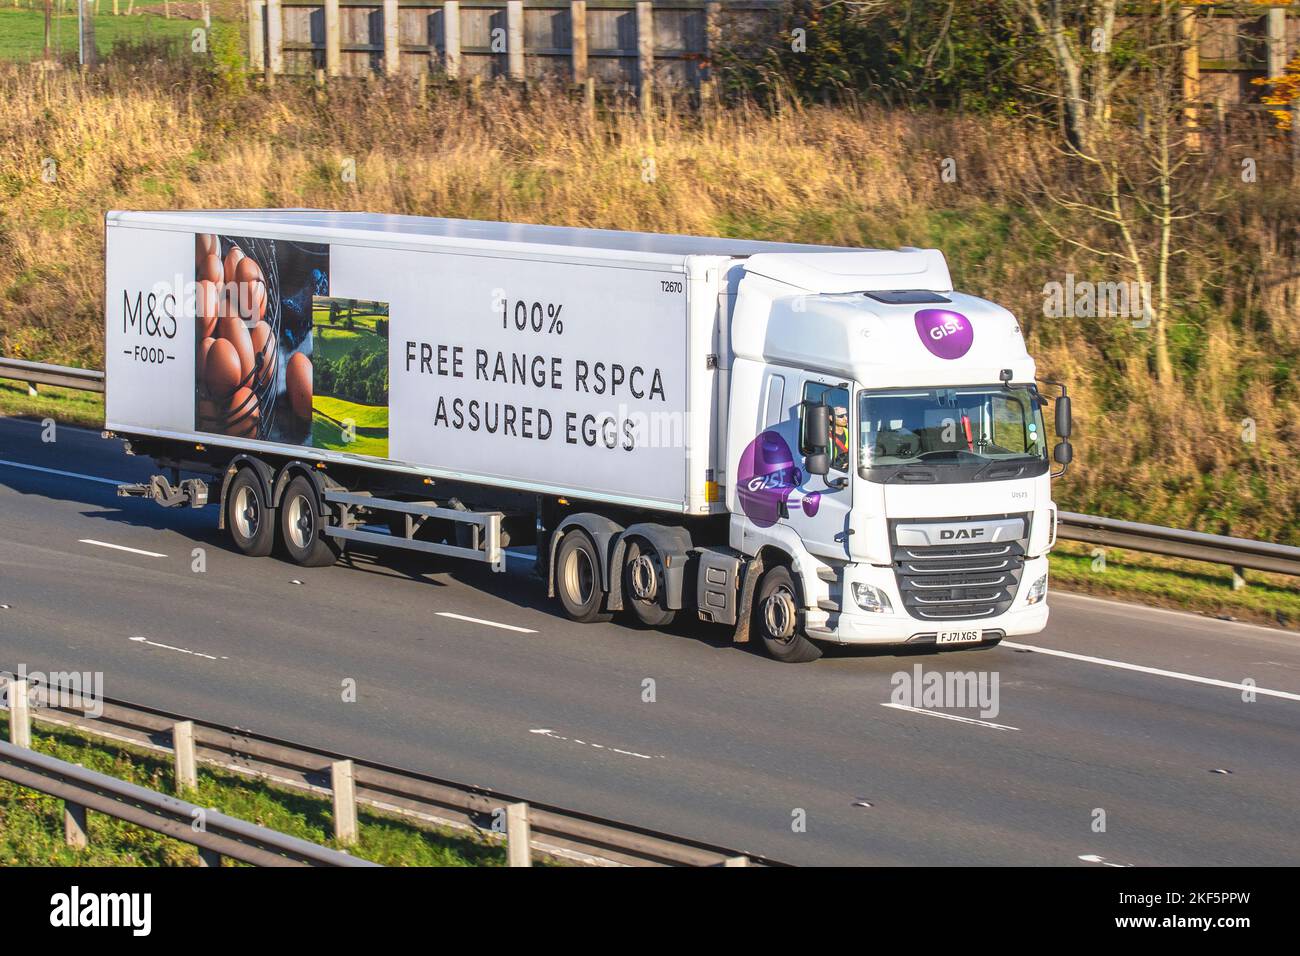 M&S, Marks & Spencer Free Range Eggs delivery in GIST DAF TRUCKS 510FTT 12902 cc; travelling on the M6 motorway UK Stock Photo